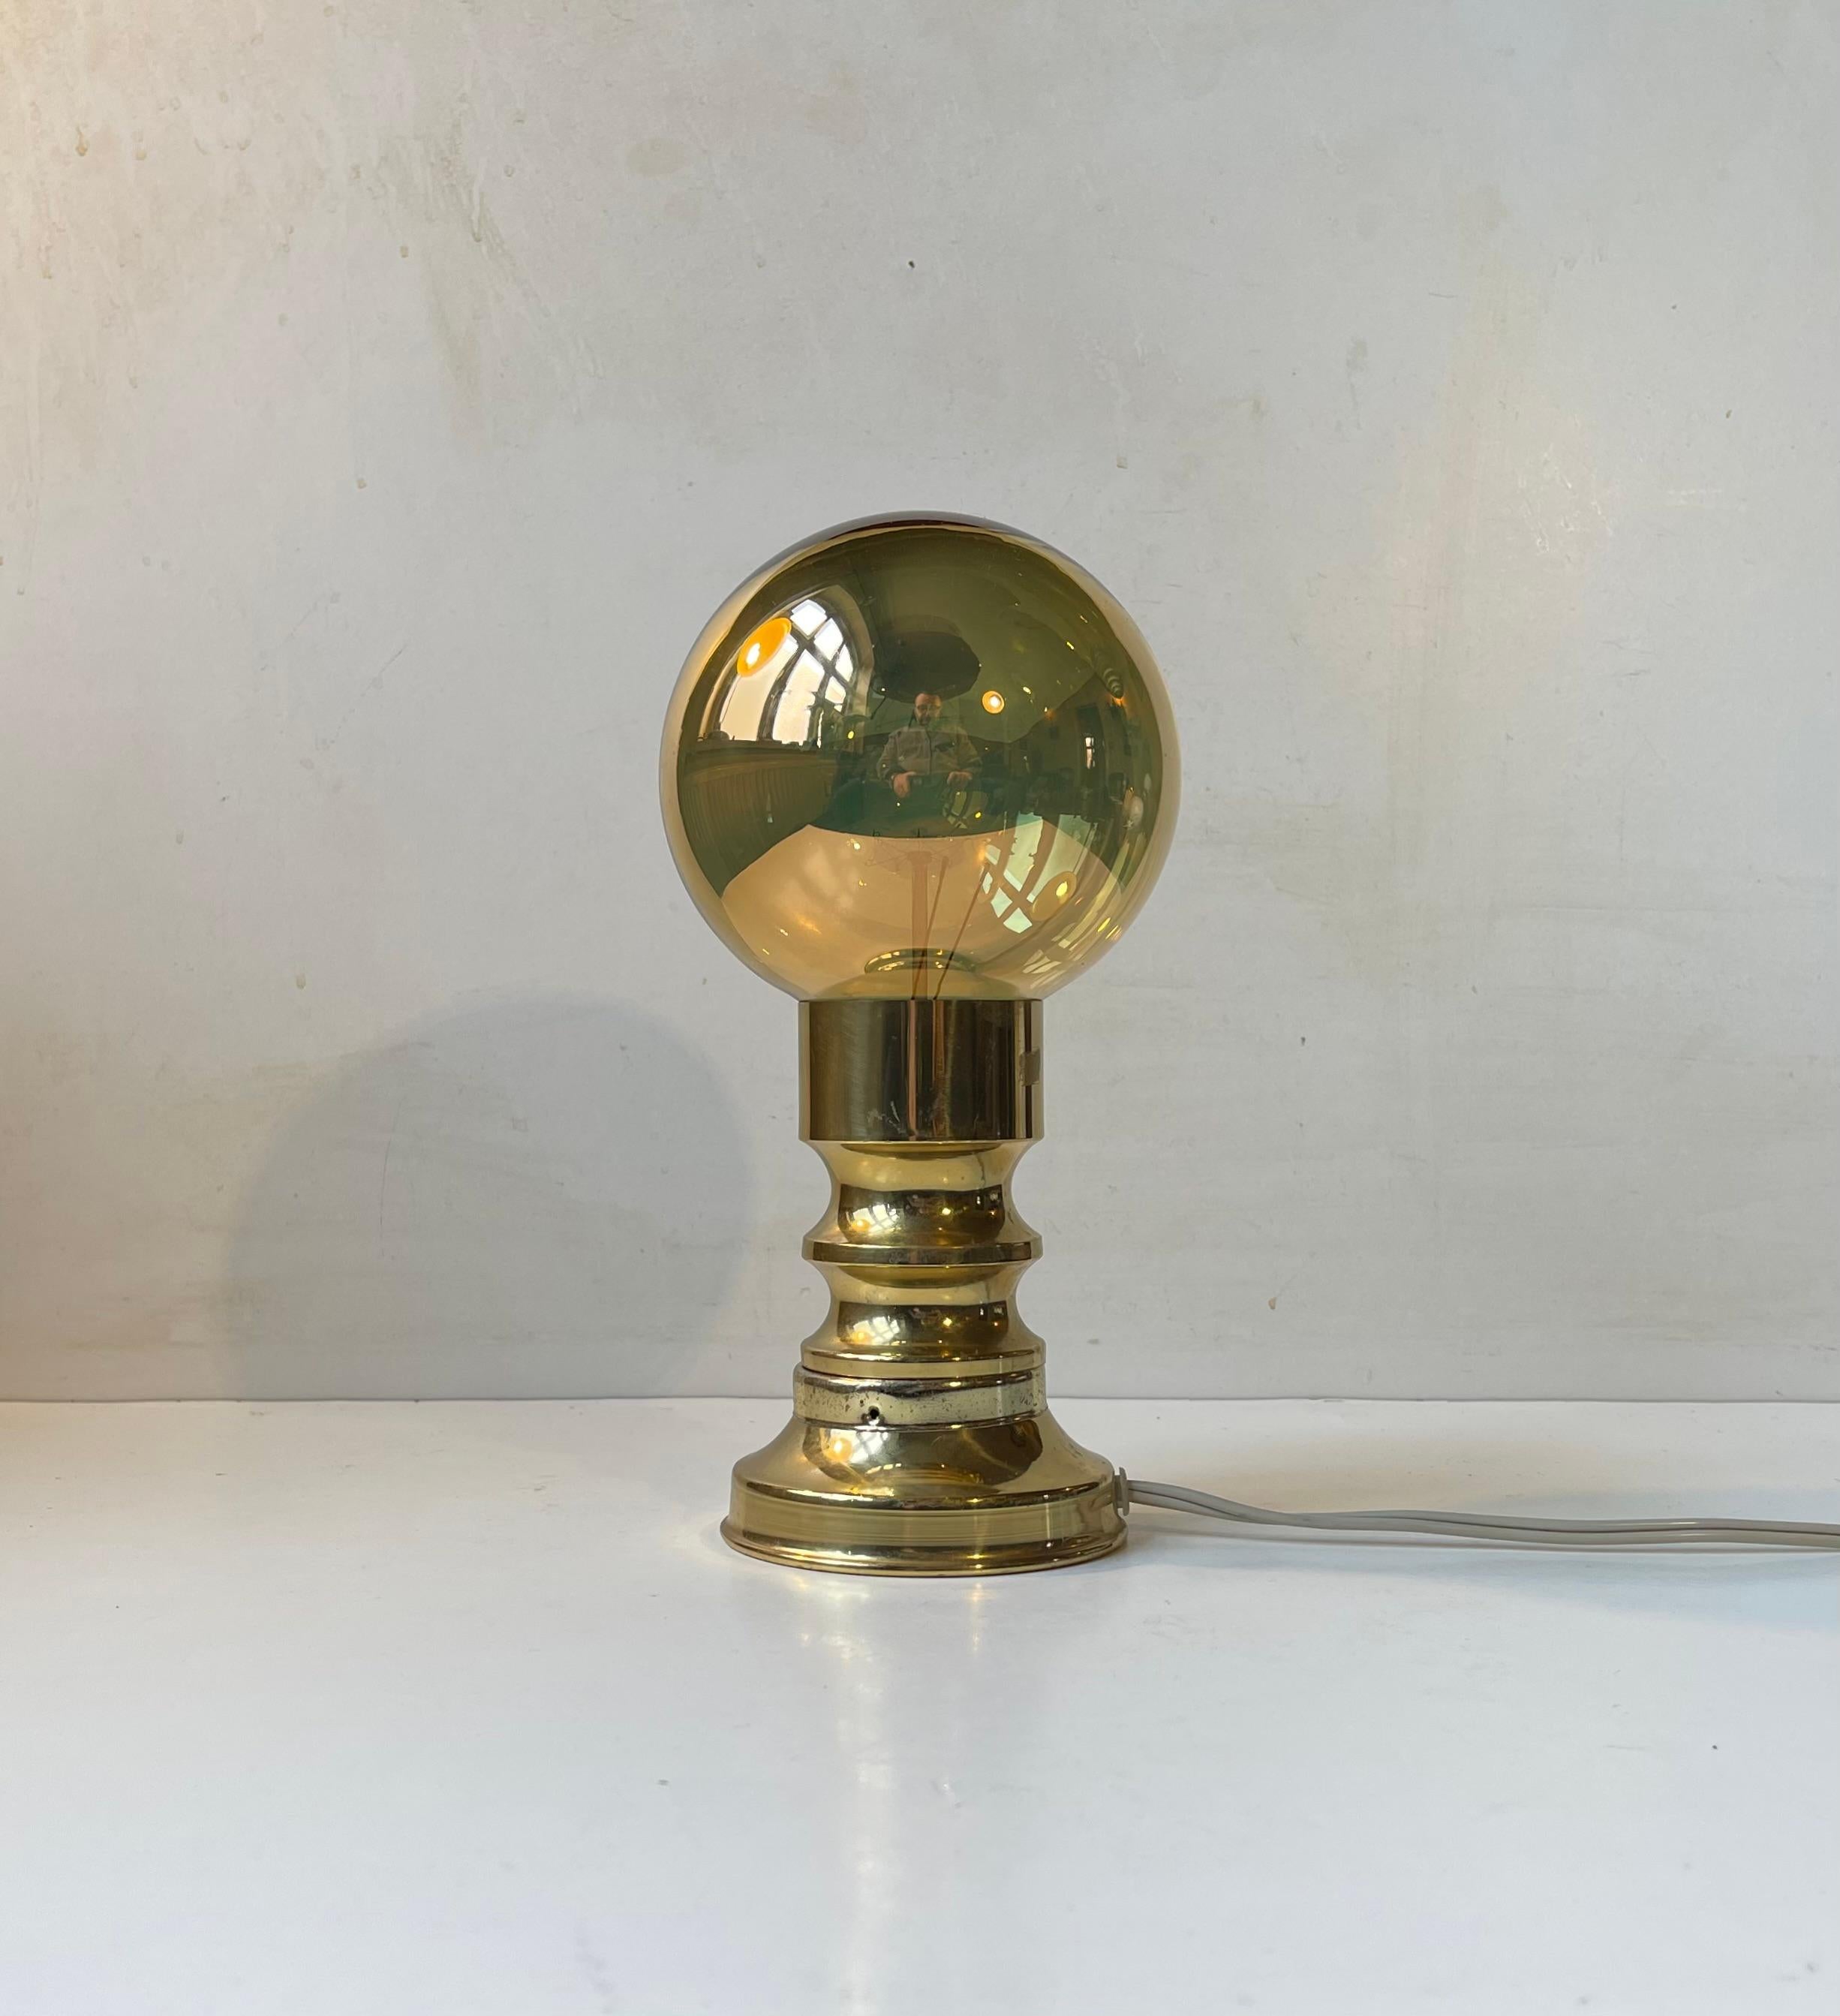 Frimann Table Light with original Golden everlasting Mirror/spy Bulb - E27 socket. Please notice that the light of this type of bulb is not meant to lid up the room but create a cosy, warm and ambient light. This table light features its original